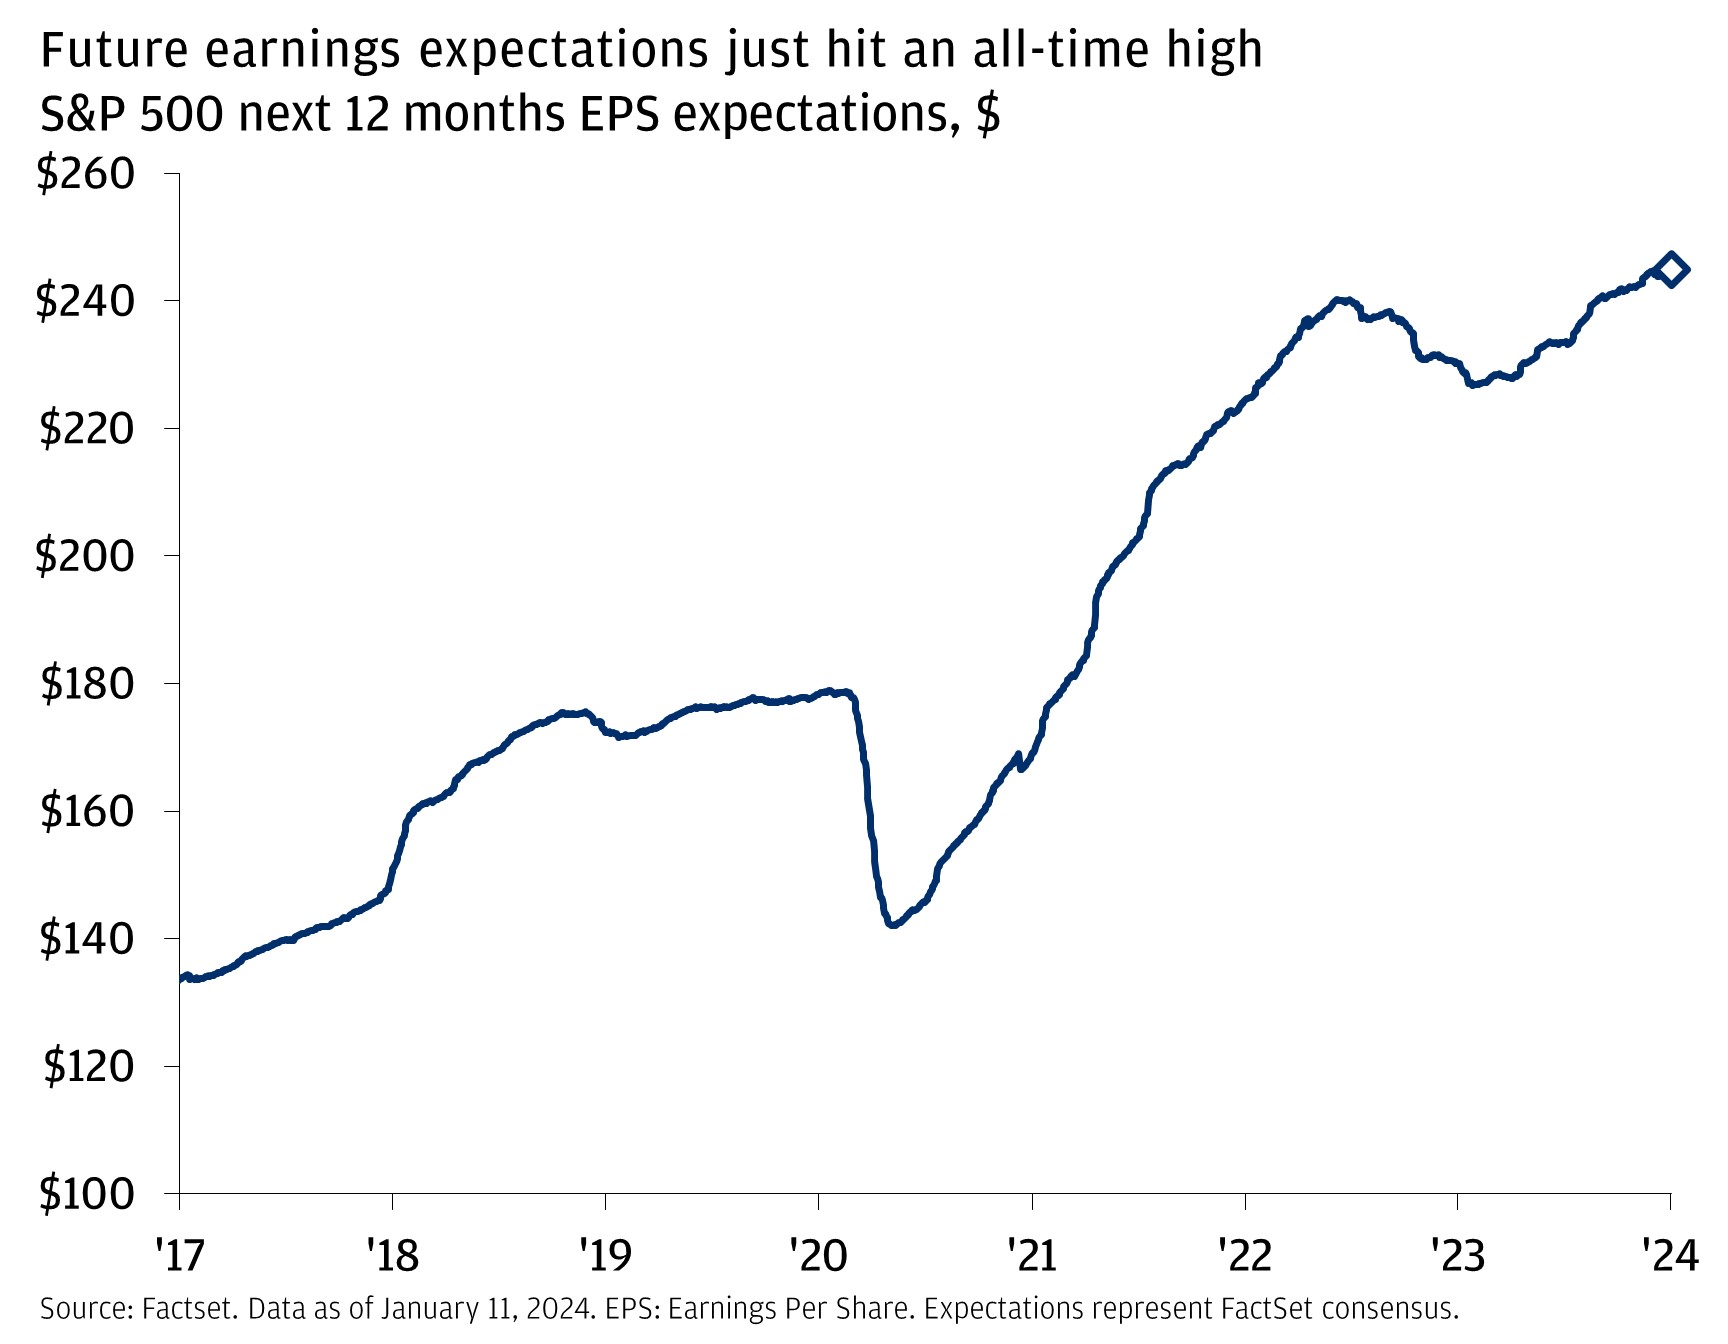 This chart shows S&P500 forward earnings estimates from 2017 to January 2024. In 2017, it was at 133.6. It then increased to 160.4 in February 2018, then continued to rise to 177.8 in March 2020. It fell from here to 142.1 in May 2020, before rising once again to 239.7 in July 2022. The series then fell to 227.2 in February 2023, and subsequently rose to 244.9 in January 2024.